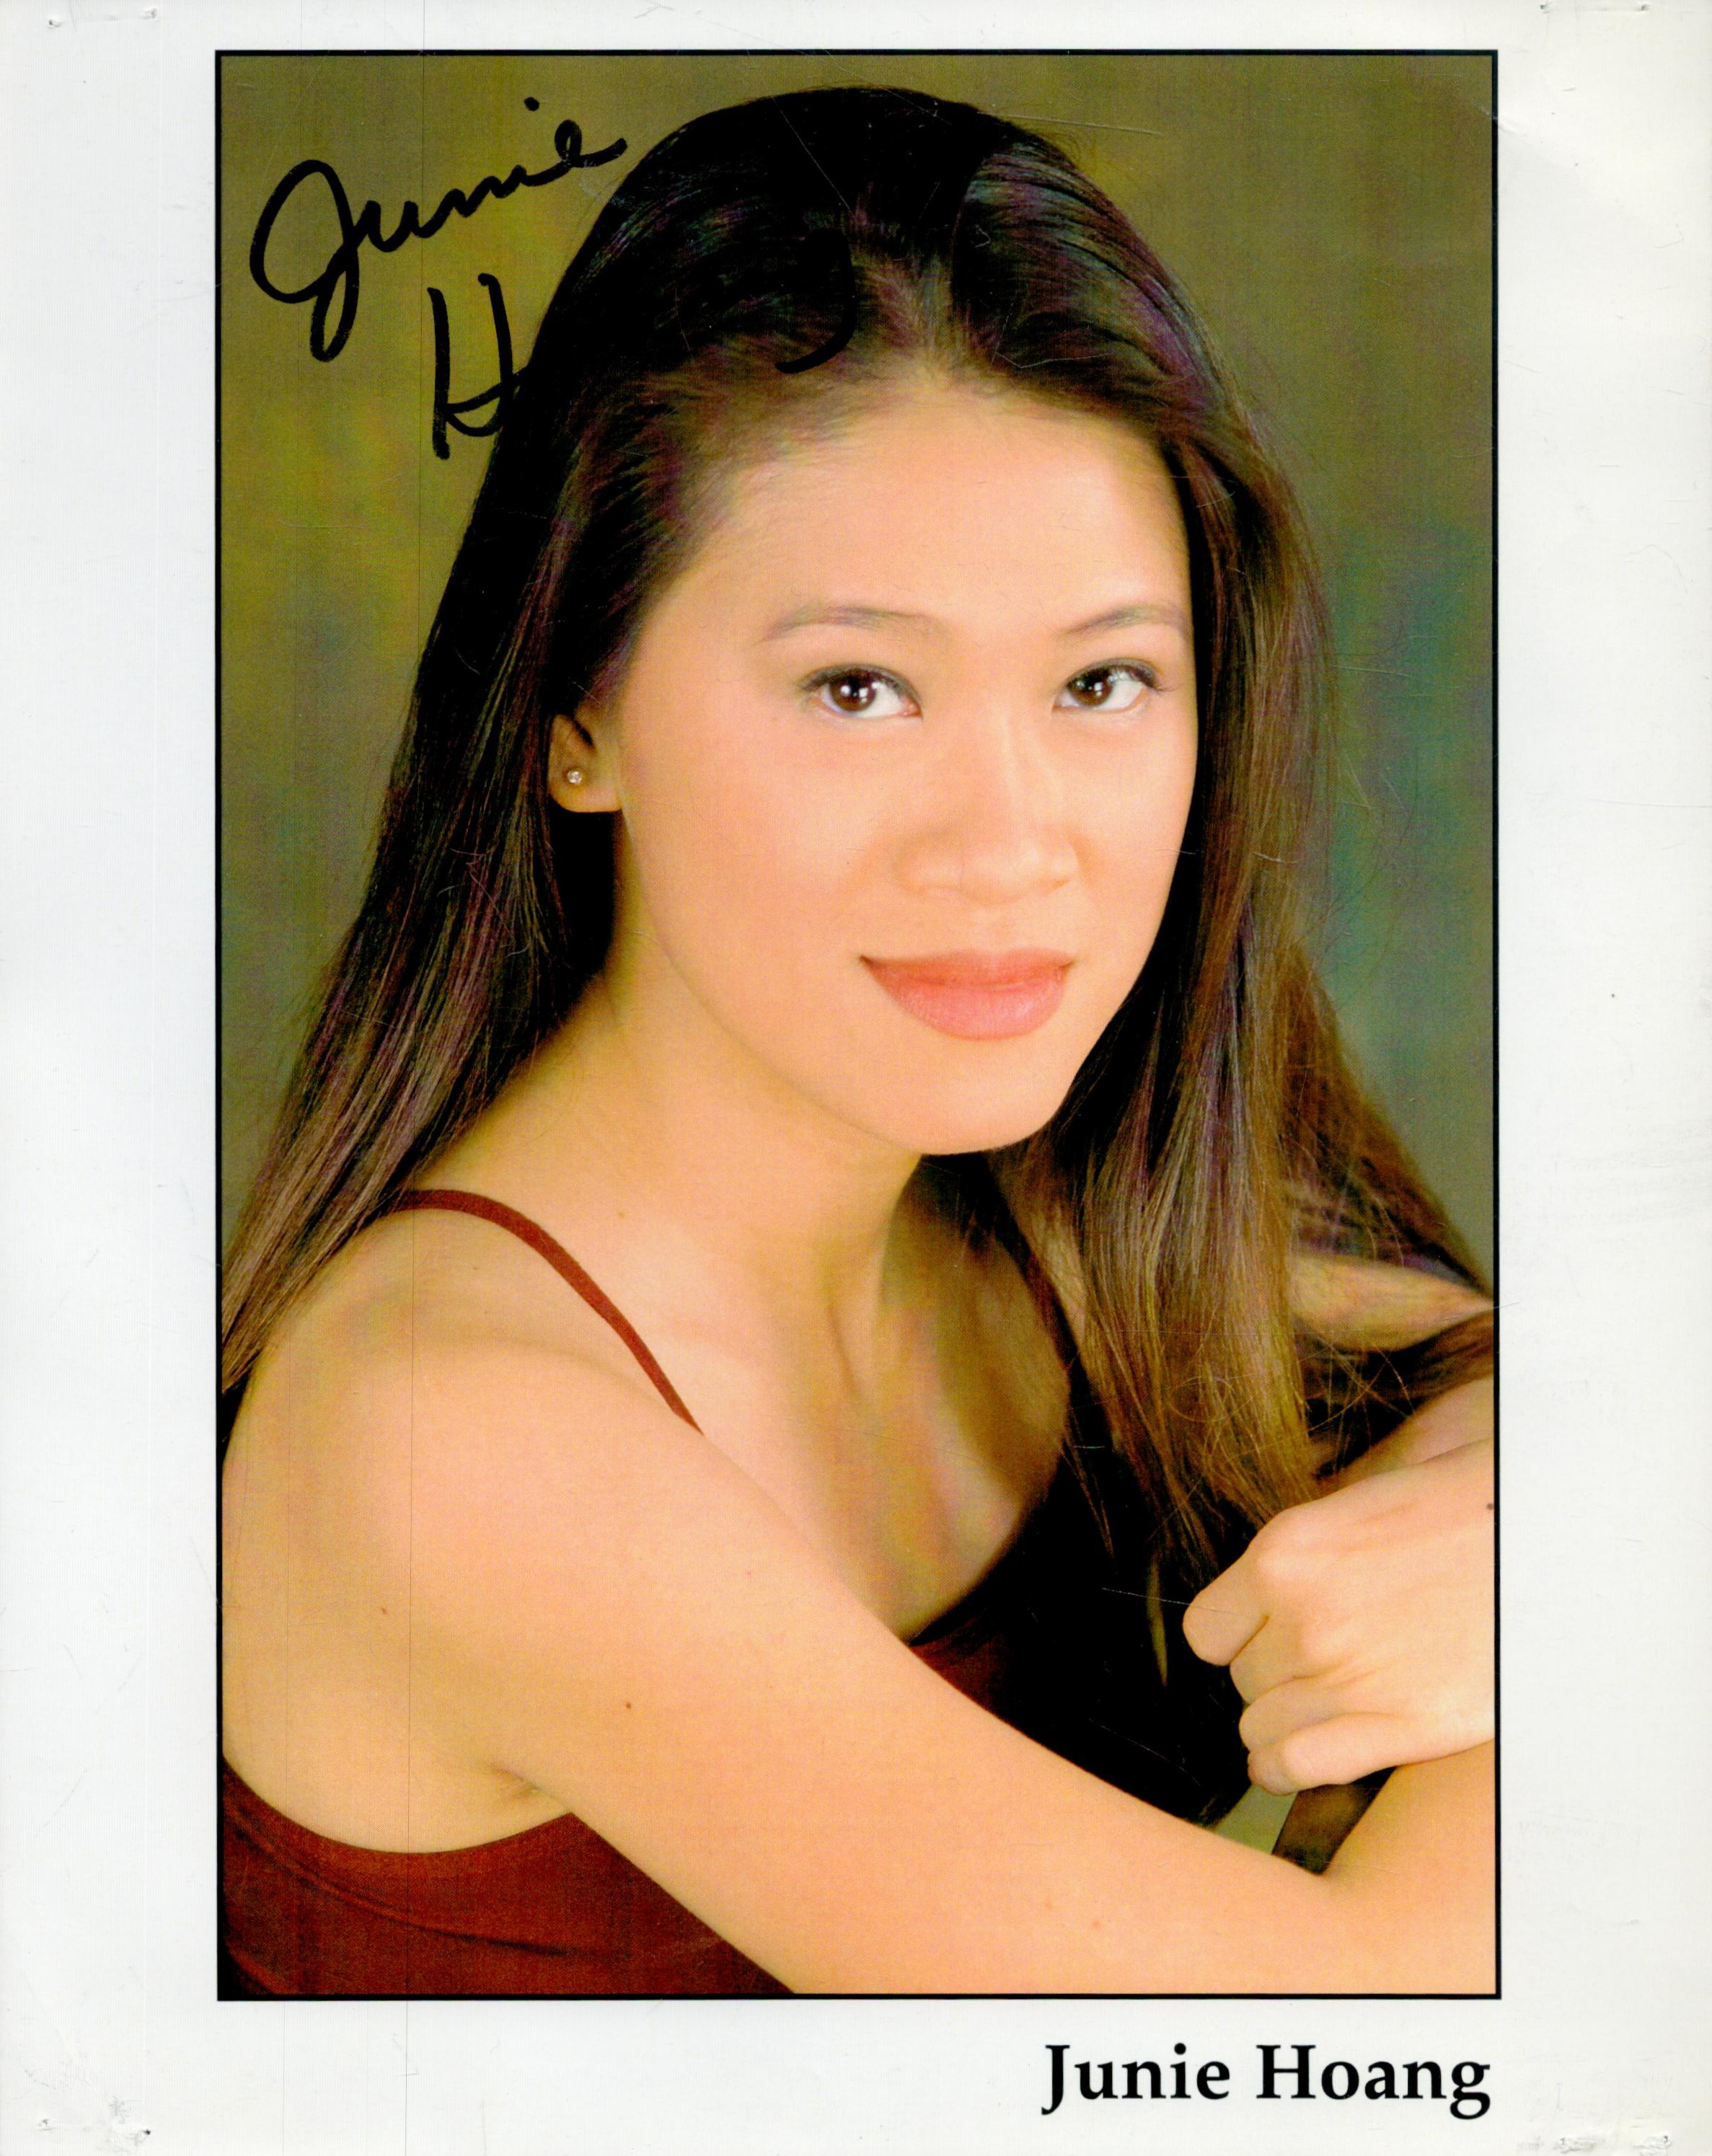 Junie Hoang signed Promo. Colour photo 10x8 Inch. An Actress. Good condition Est.